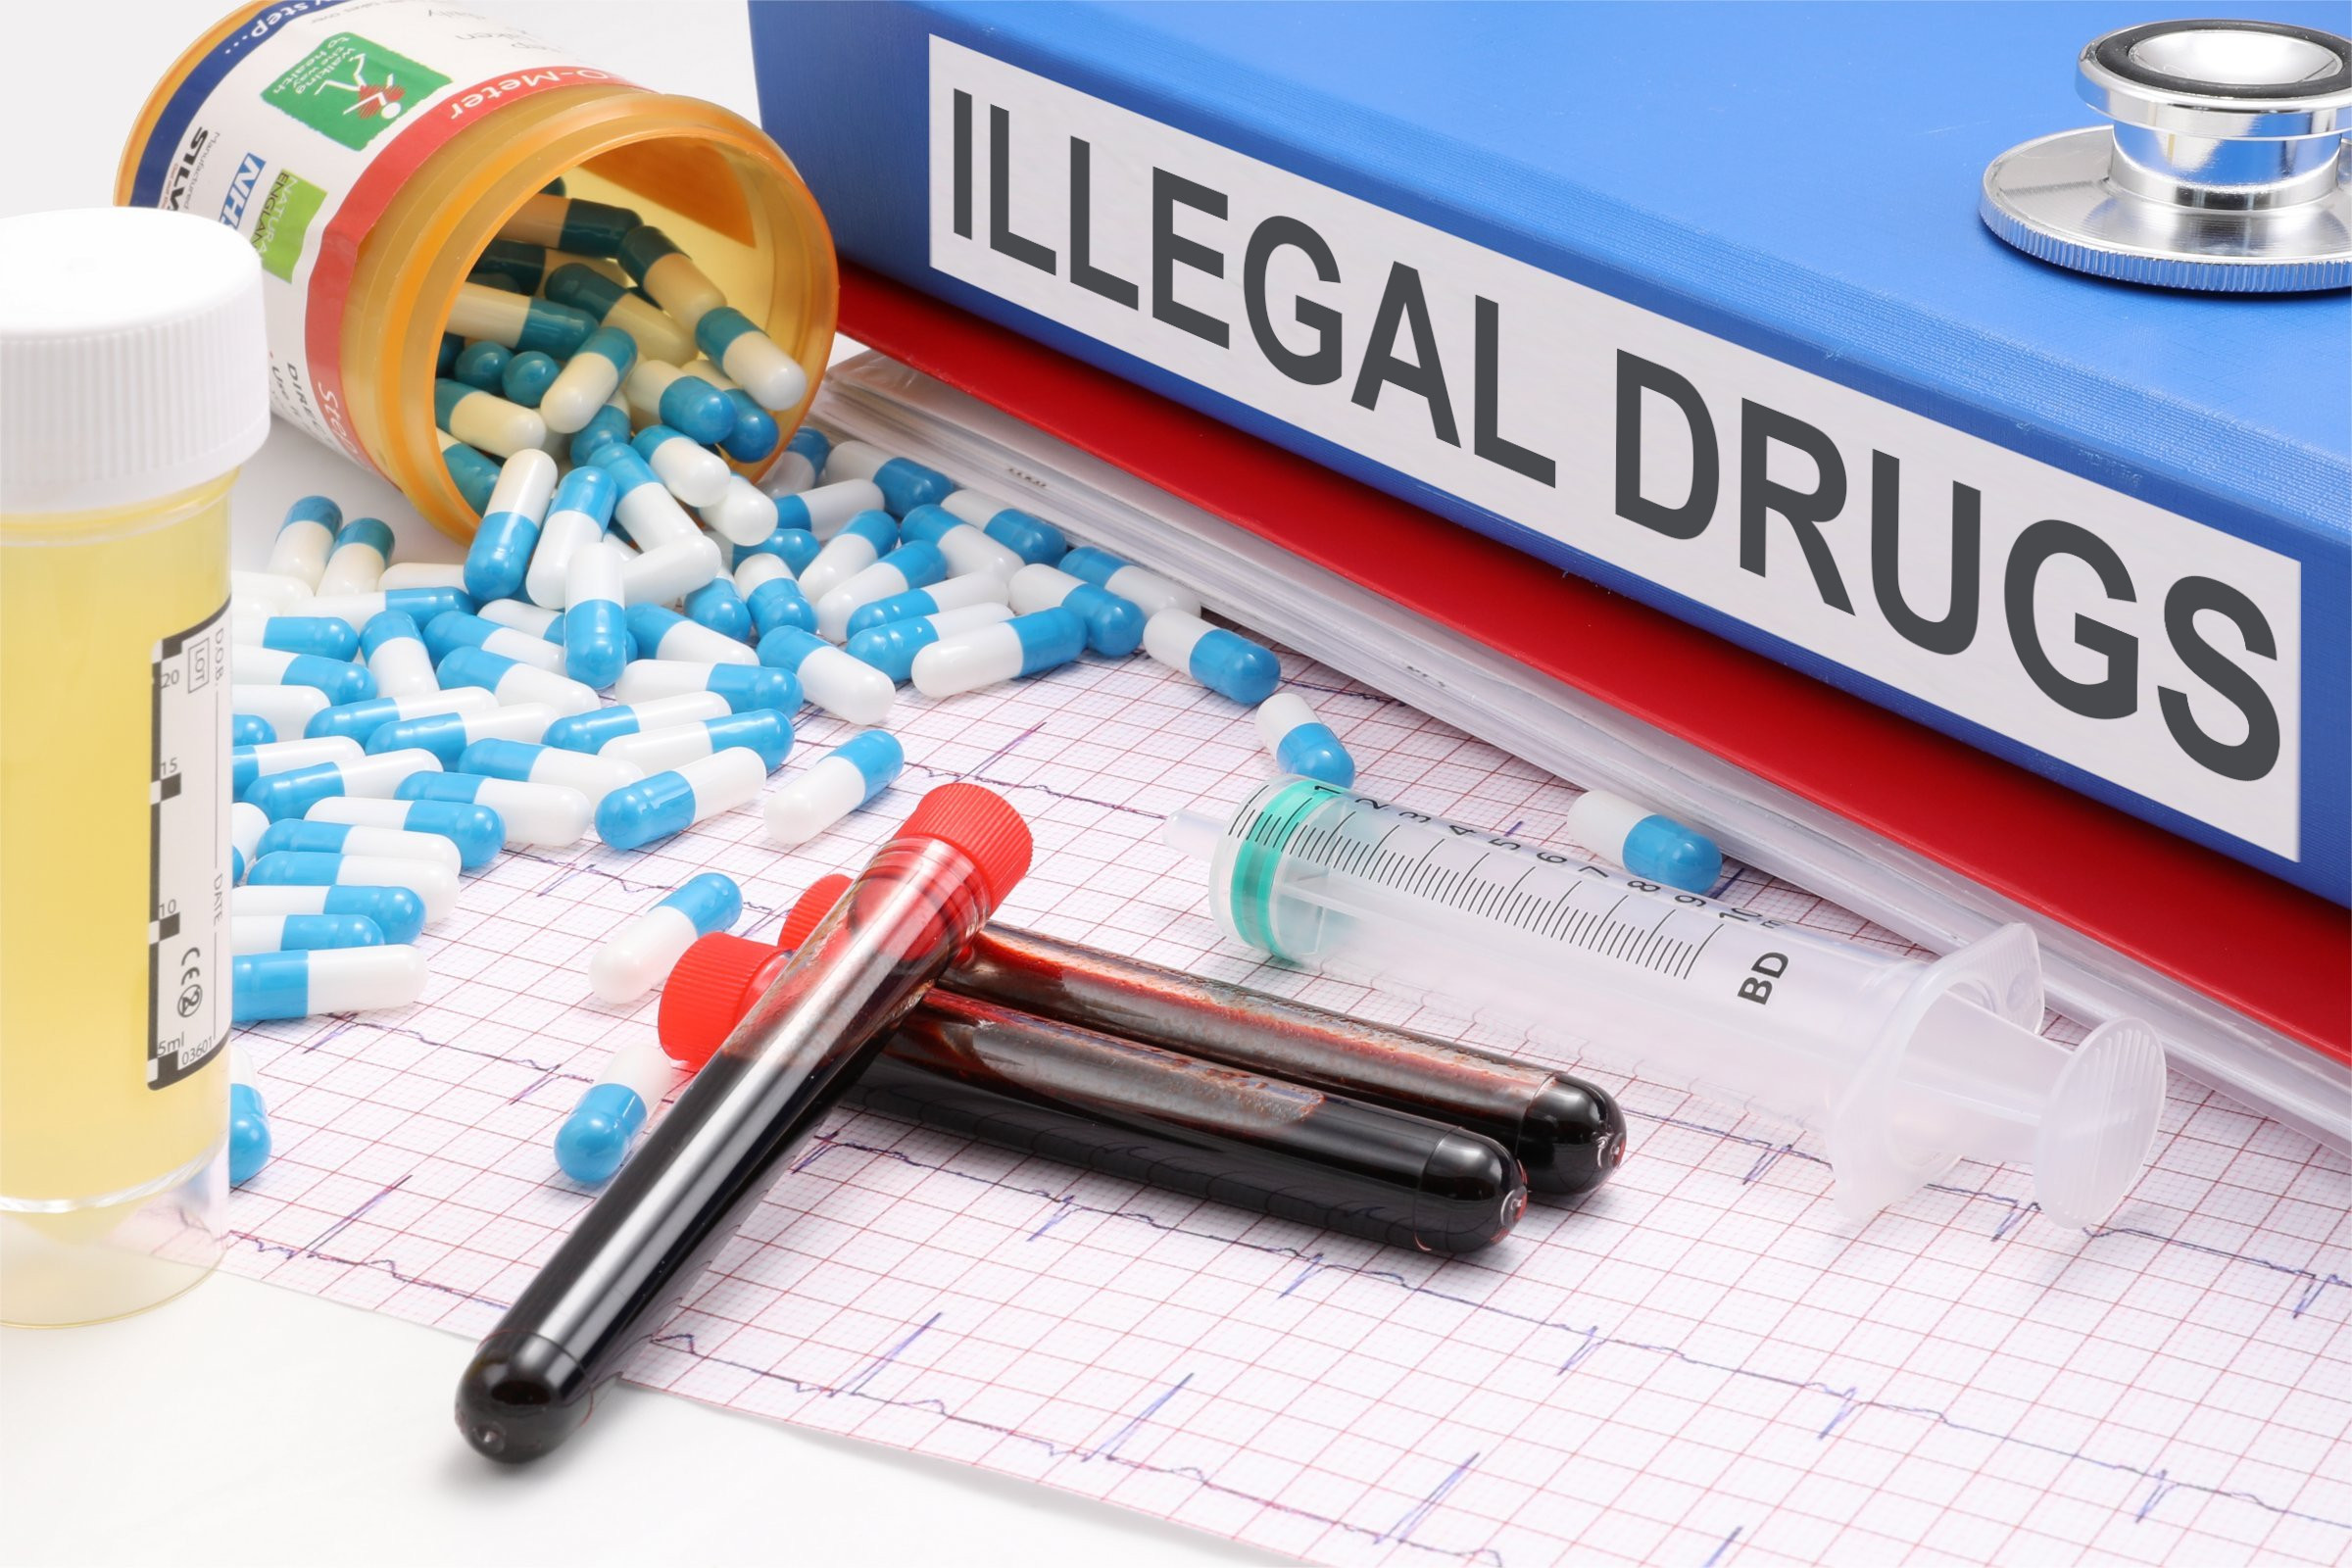 Illegal Drugs - Free of Charge Creative Commons Medical image